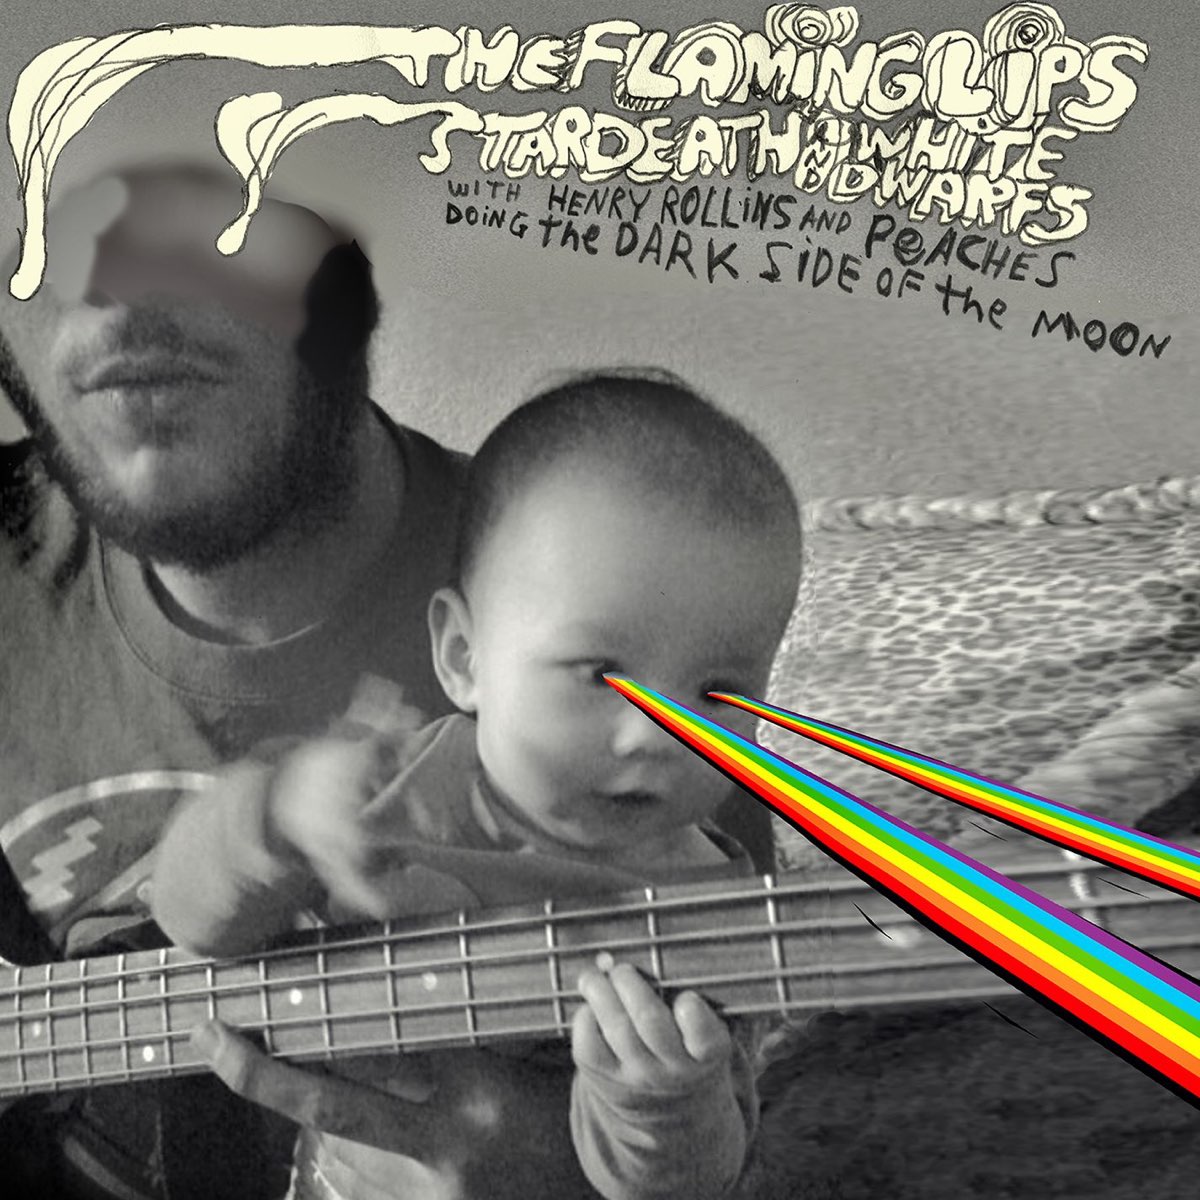 Dark Side of The Moon - Flaming Lips